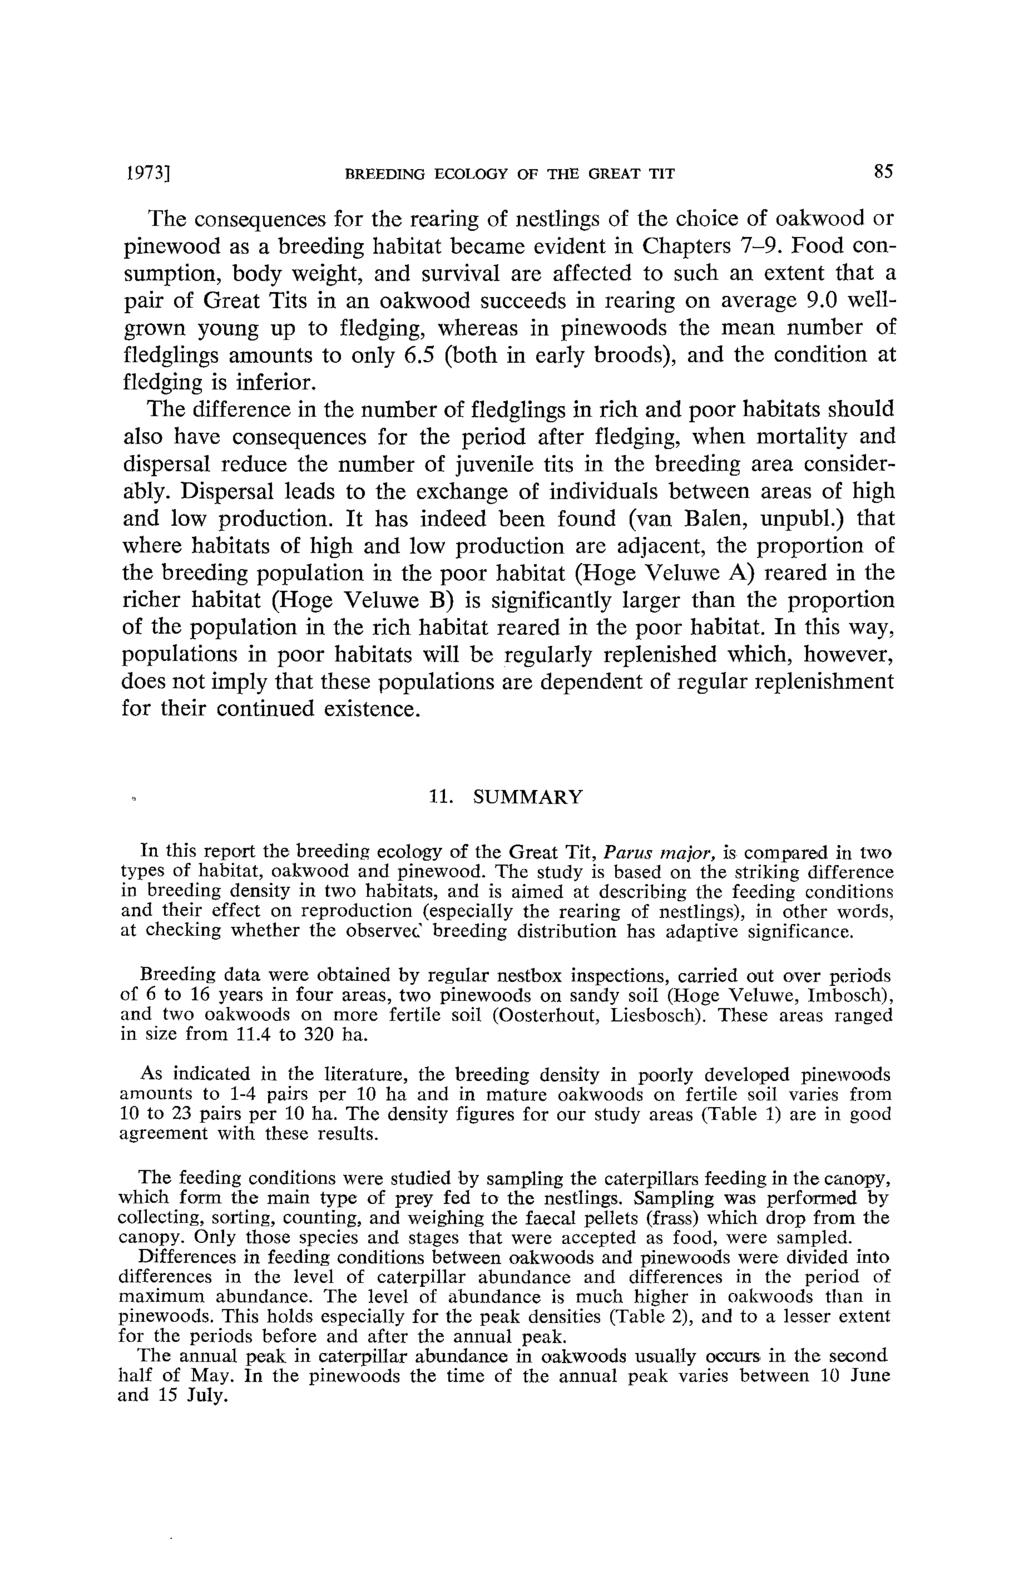 1973] BREEDING ECOLOGY OF THE GREAT TIT 85 The consequences for the rearing of nestlings of the choice of oakwood or pinewood as a breeding habitat became evident in Chapters 7-9.